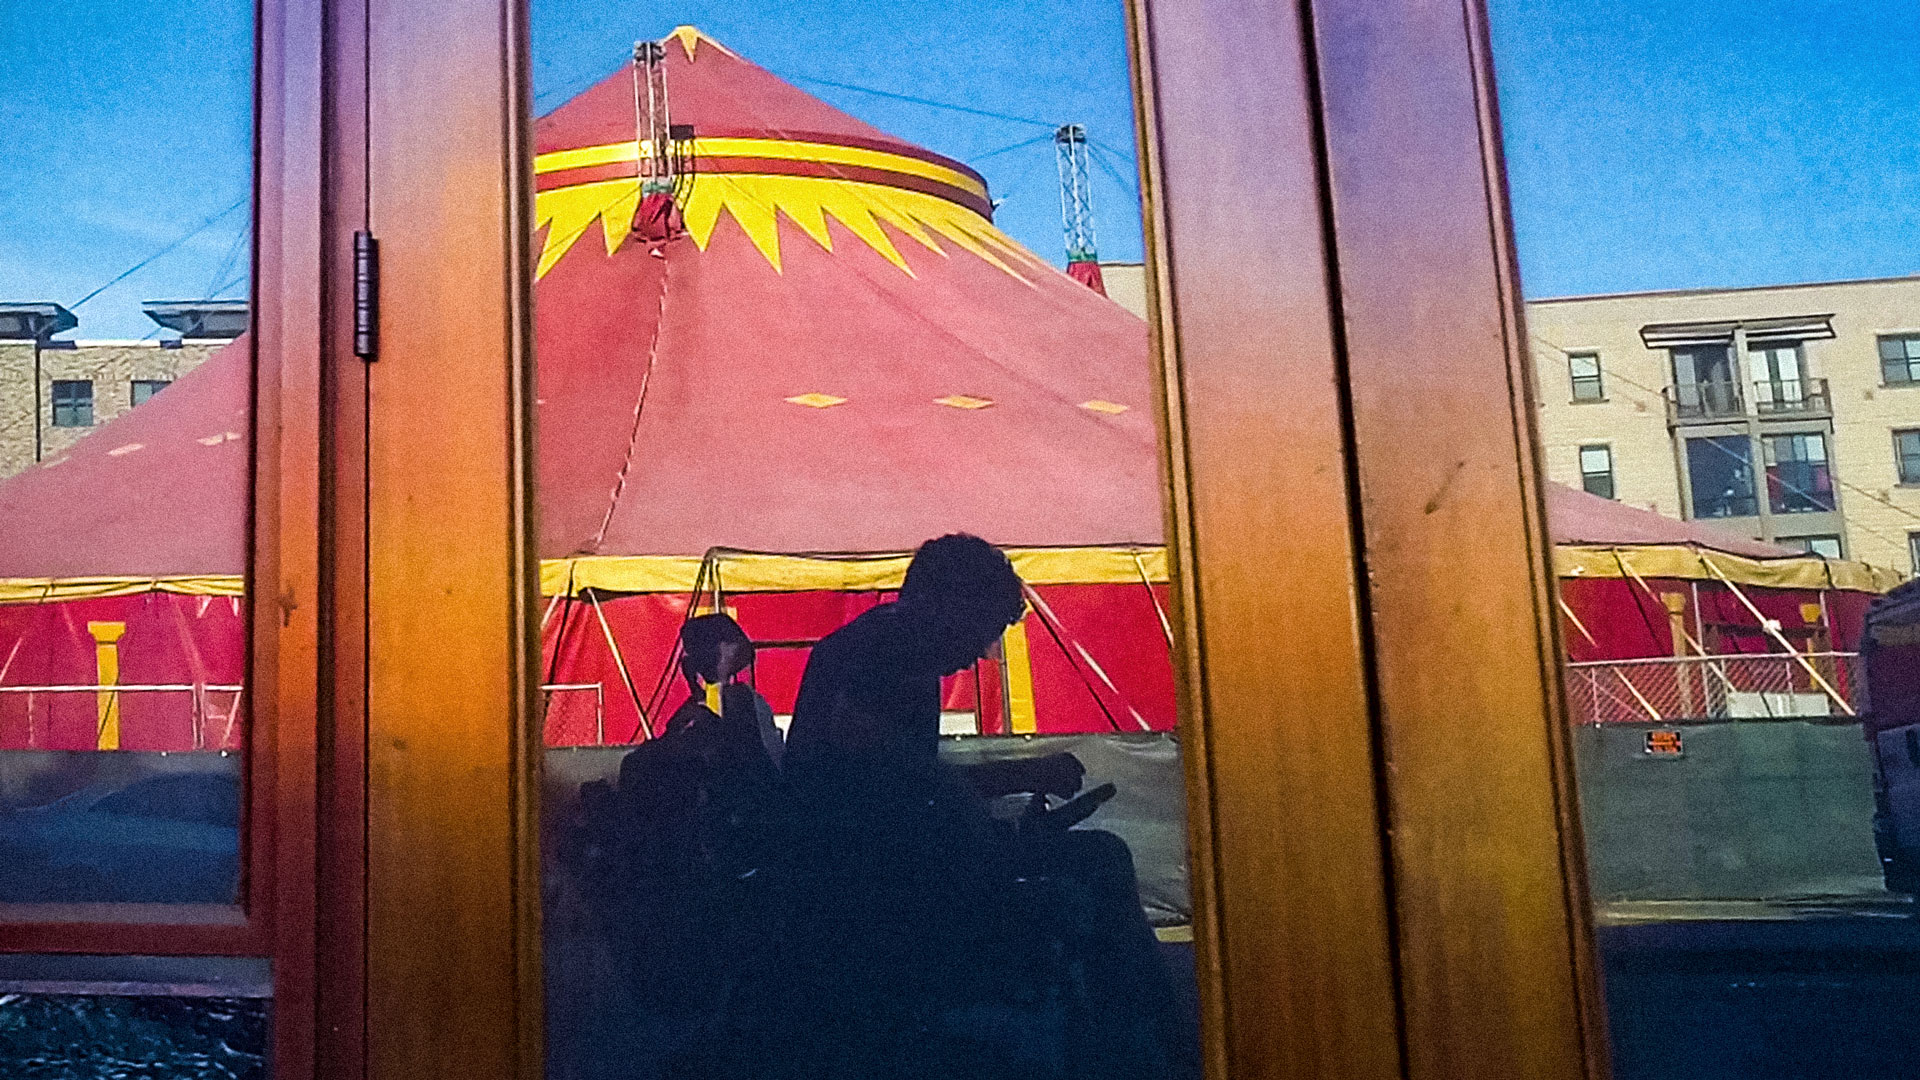 In a reflection of an unmarked storefront is a grayish silhouette of a man using an electric wheelchair. Behind the man is a spectacular red and yellow circus tent. 

Image credit: Reid Davenport
